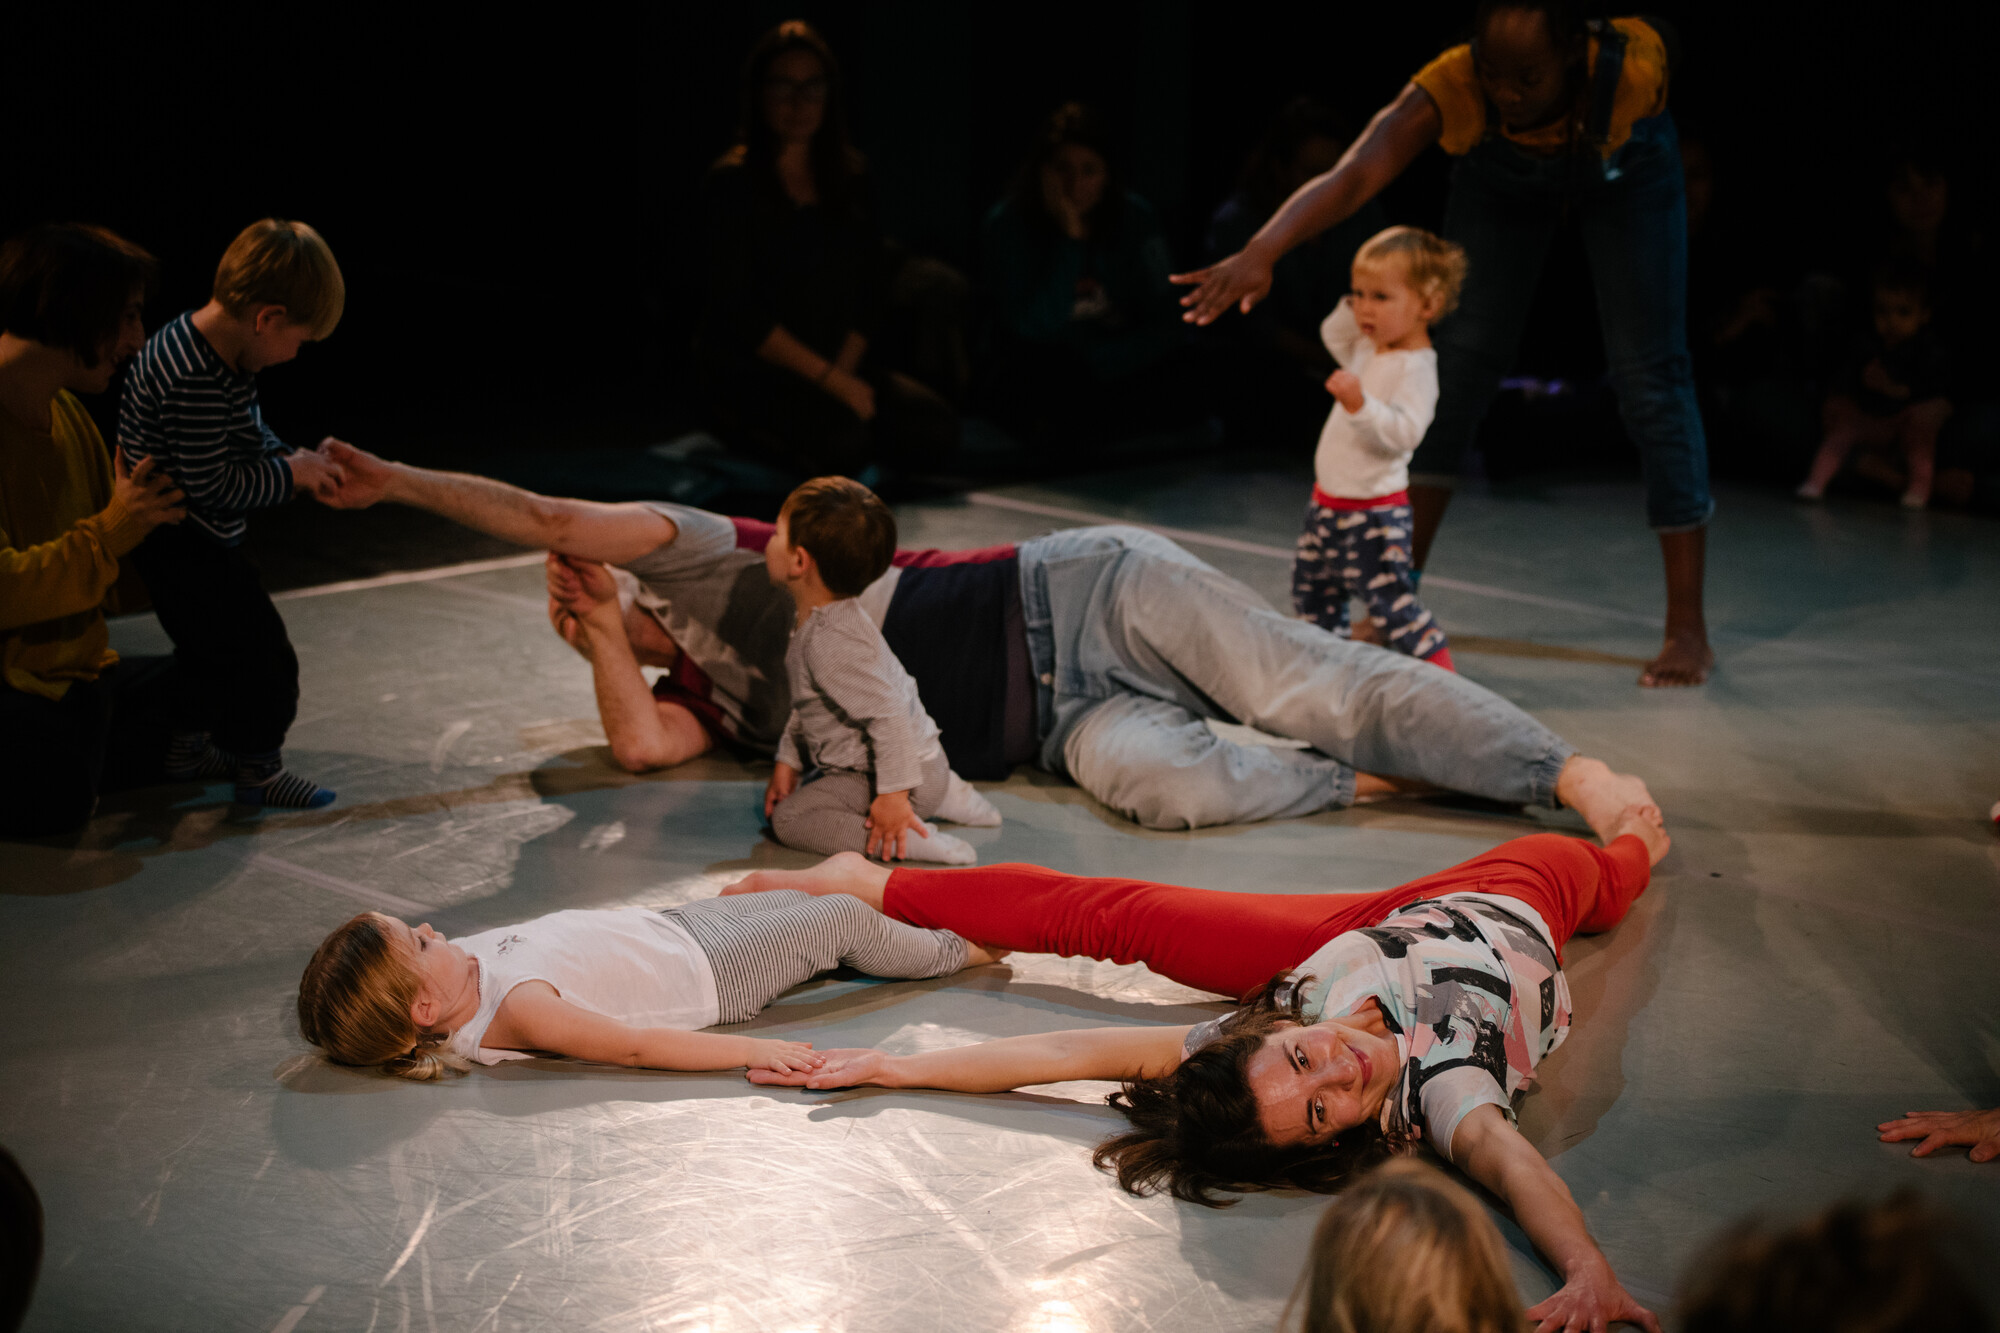 Five adults lay on stage and perform alongside three young children.